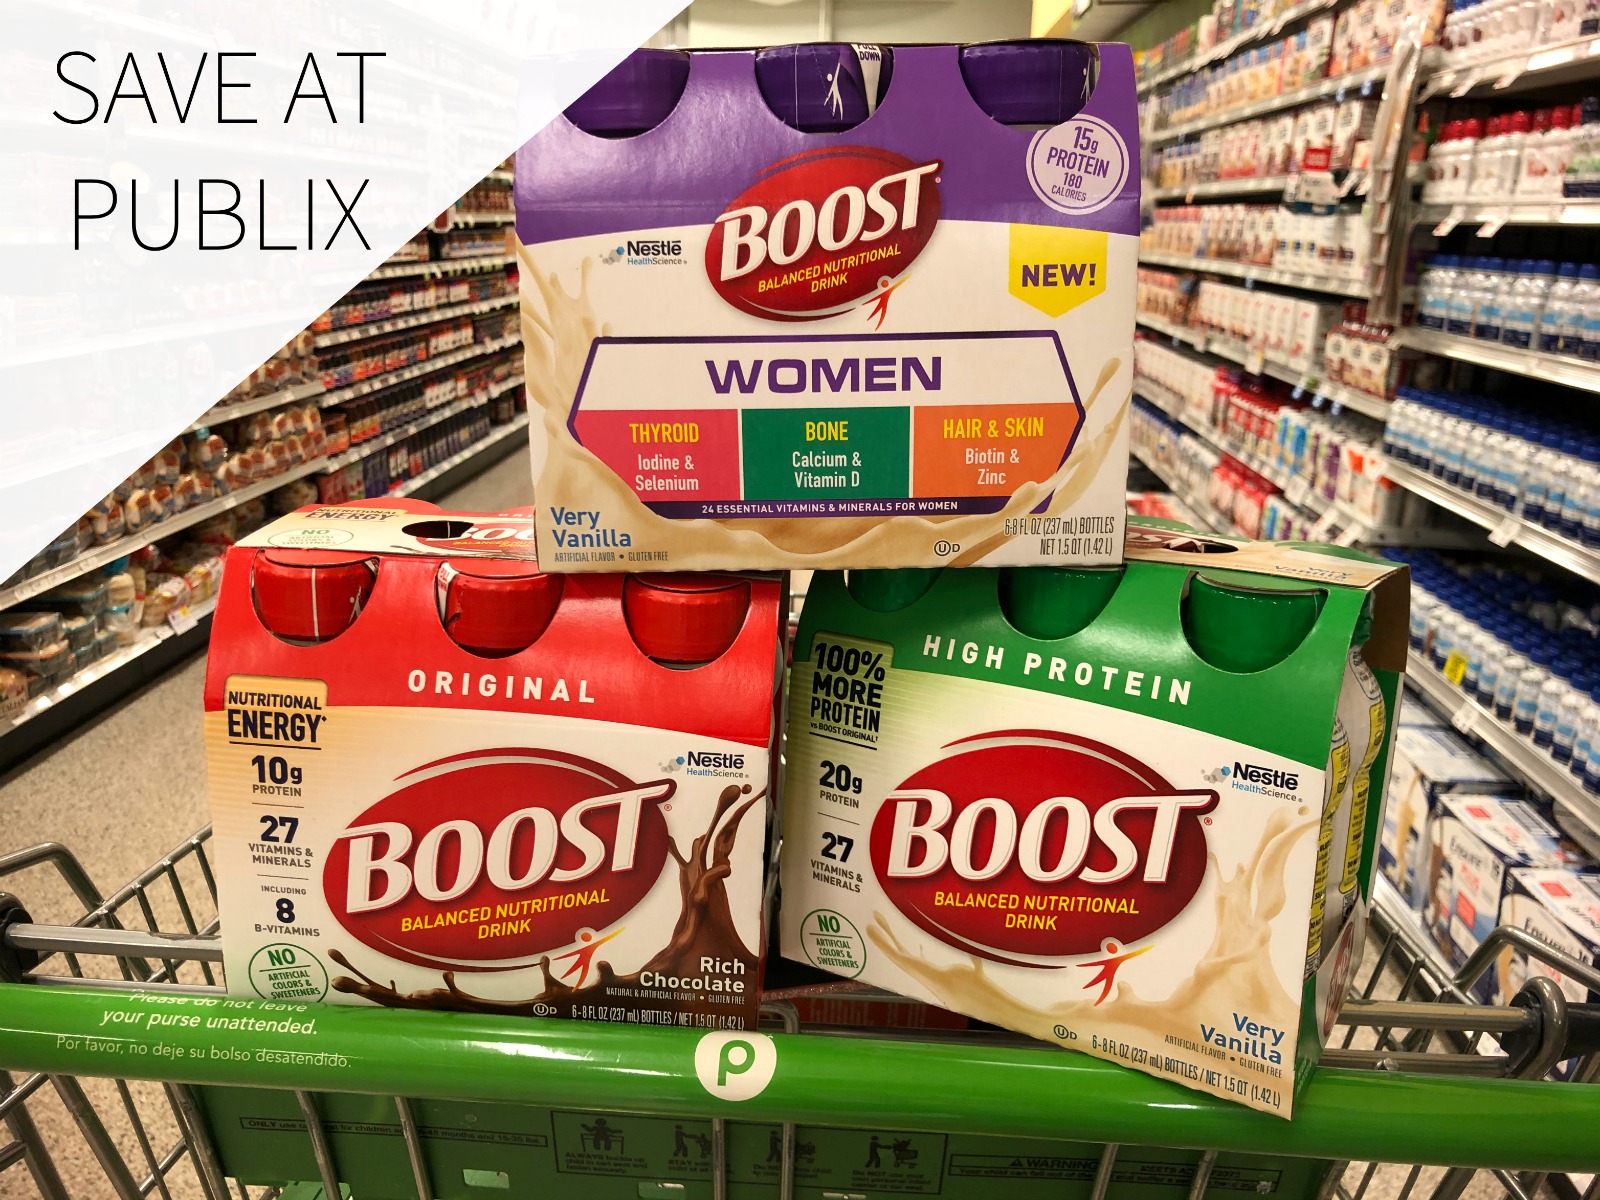 Get Big Savings On BOOST® Nutritional Drinks At Publix – Sale & Coupons Make It Time To Stock Up!